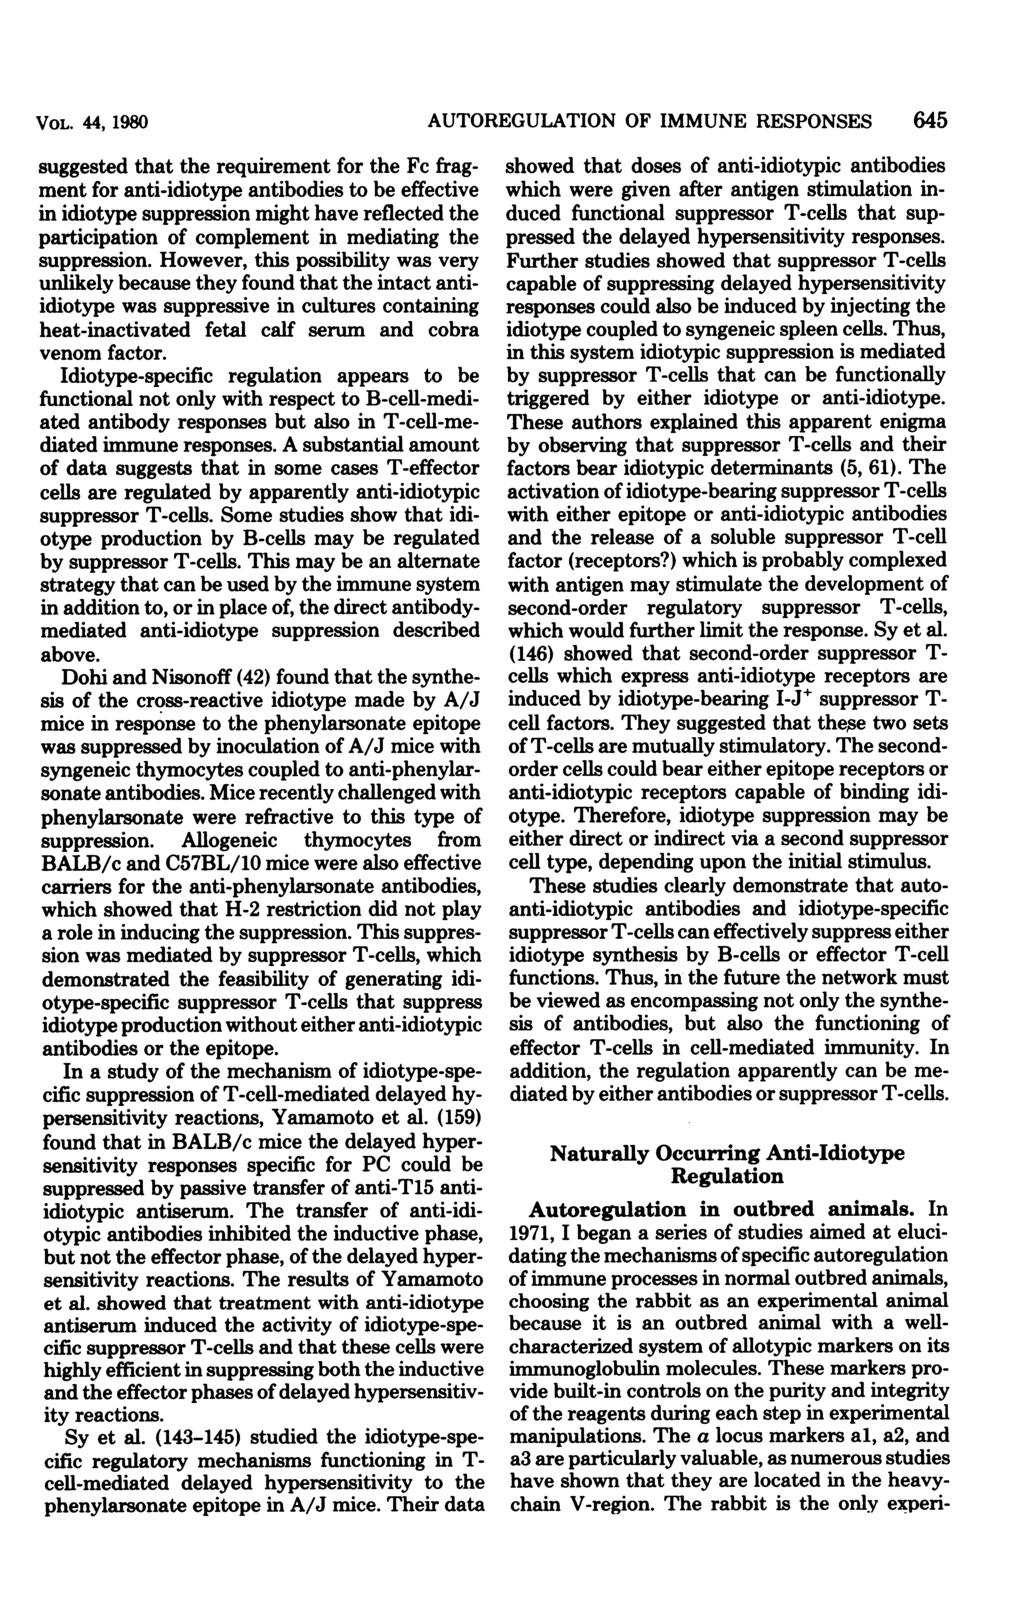 VOL. 44, 1980 suggested that the requirement for the Fc fragment for anti-idiotype antibodies to be effective in idiotype suppression might have reflected the participation of complement in mediating